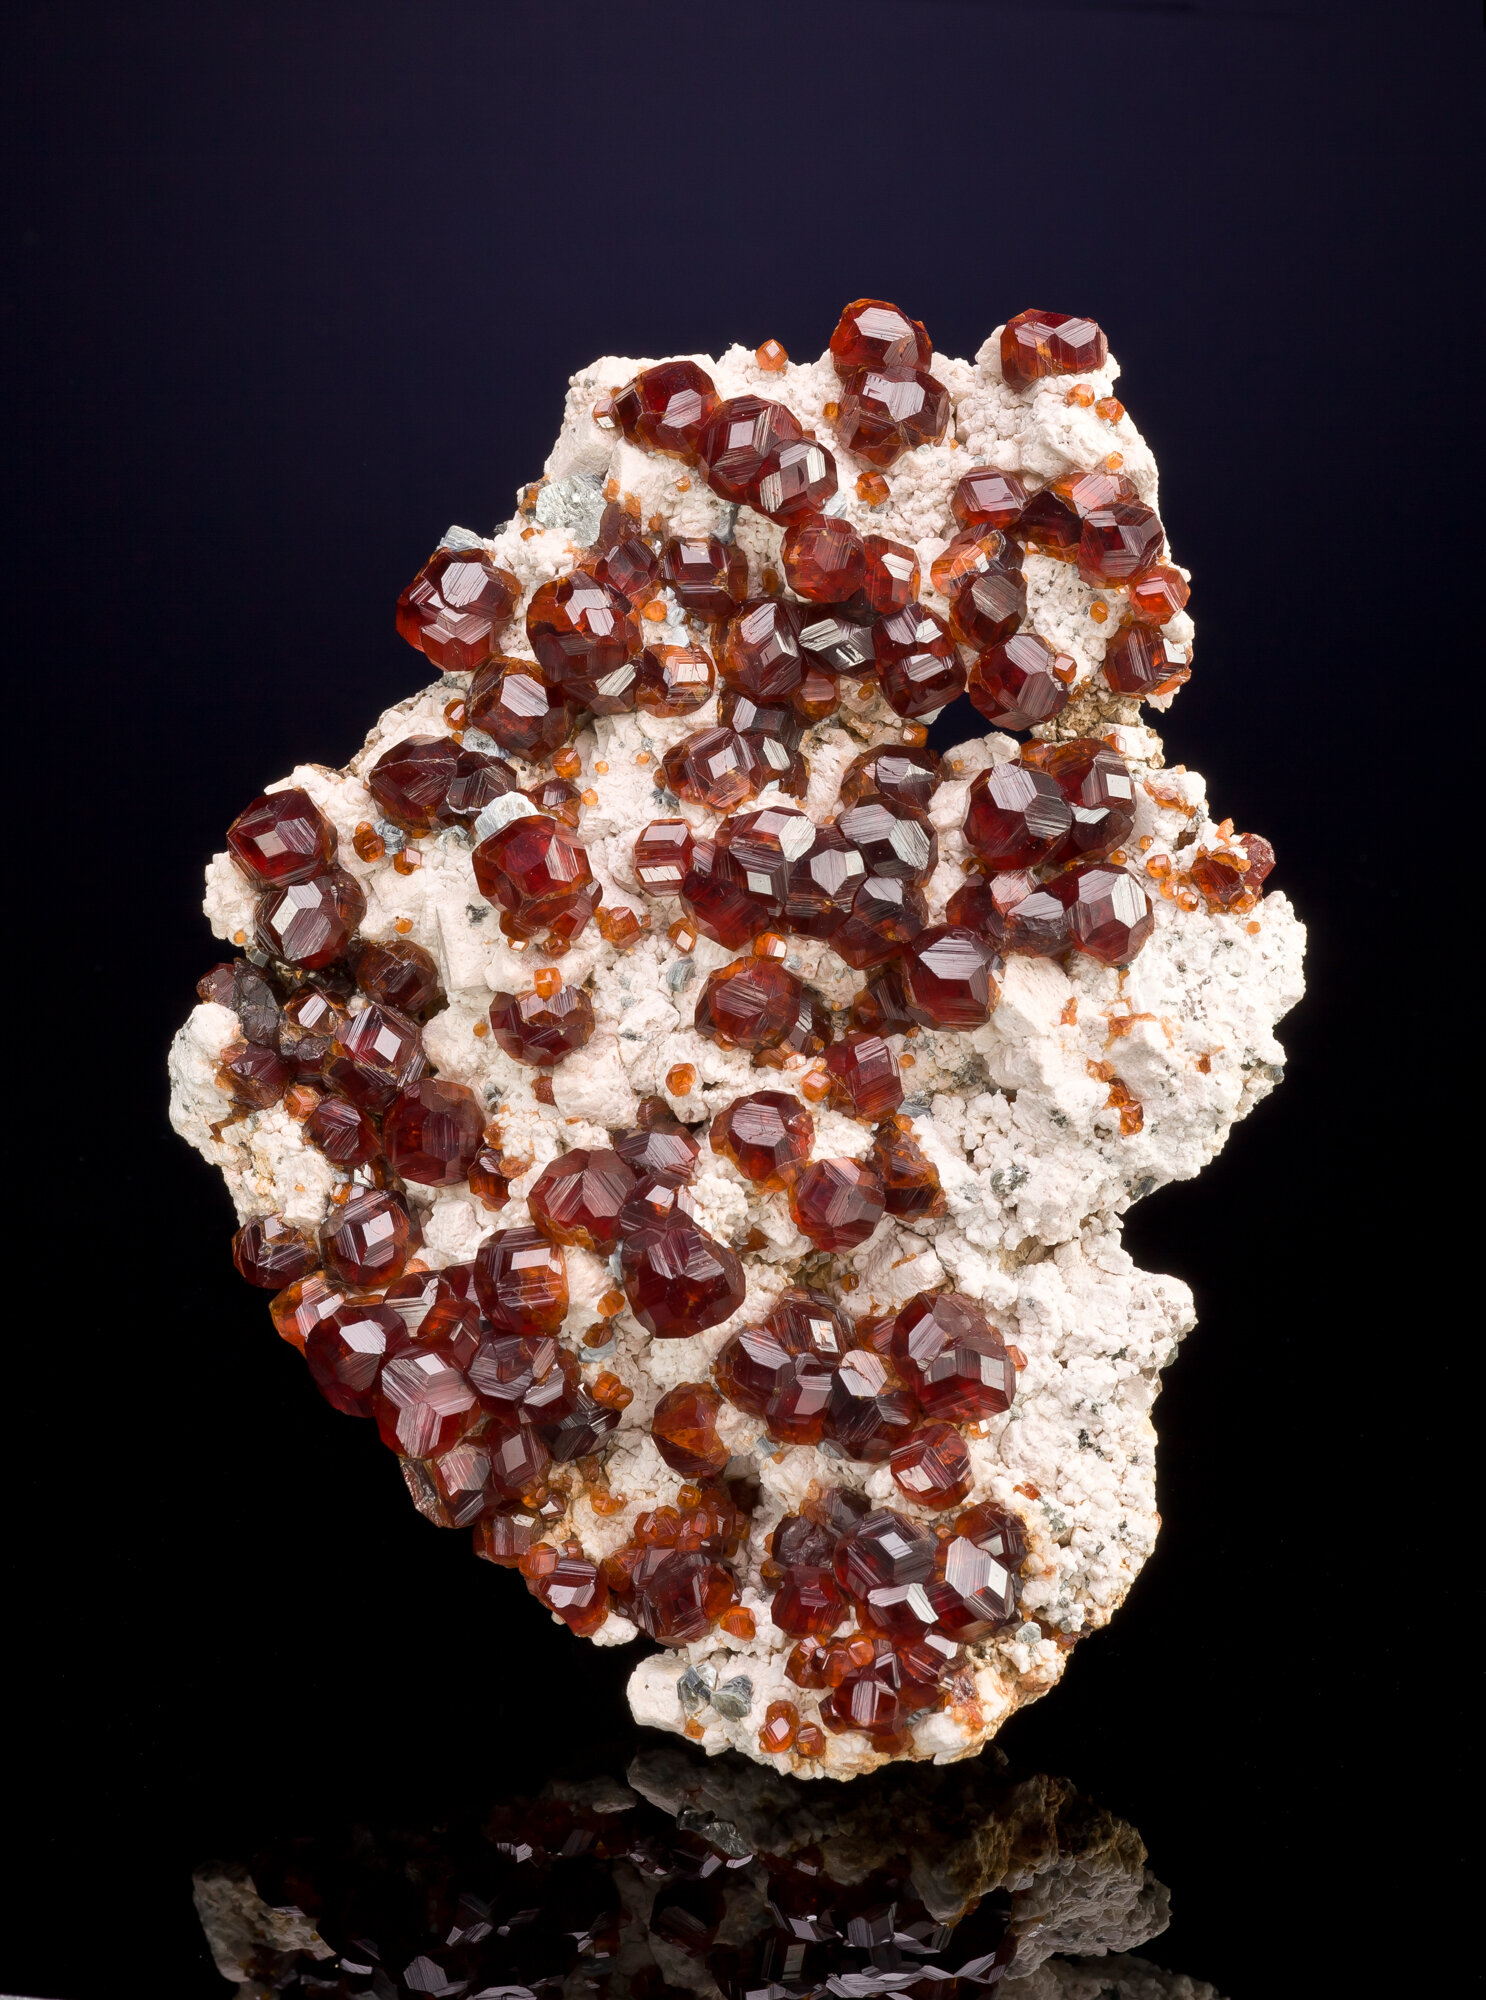  Spessartine on decomposed granite, 14.5 cm, from the Wushan mine, Tongbei, Zhangzhou Prefecture, Fujian Province, China. Collected in 1998; ex Daniel Trinchillo/Marcus Budil collection. 